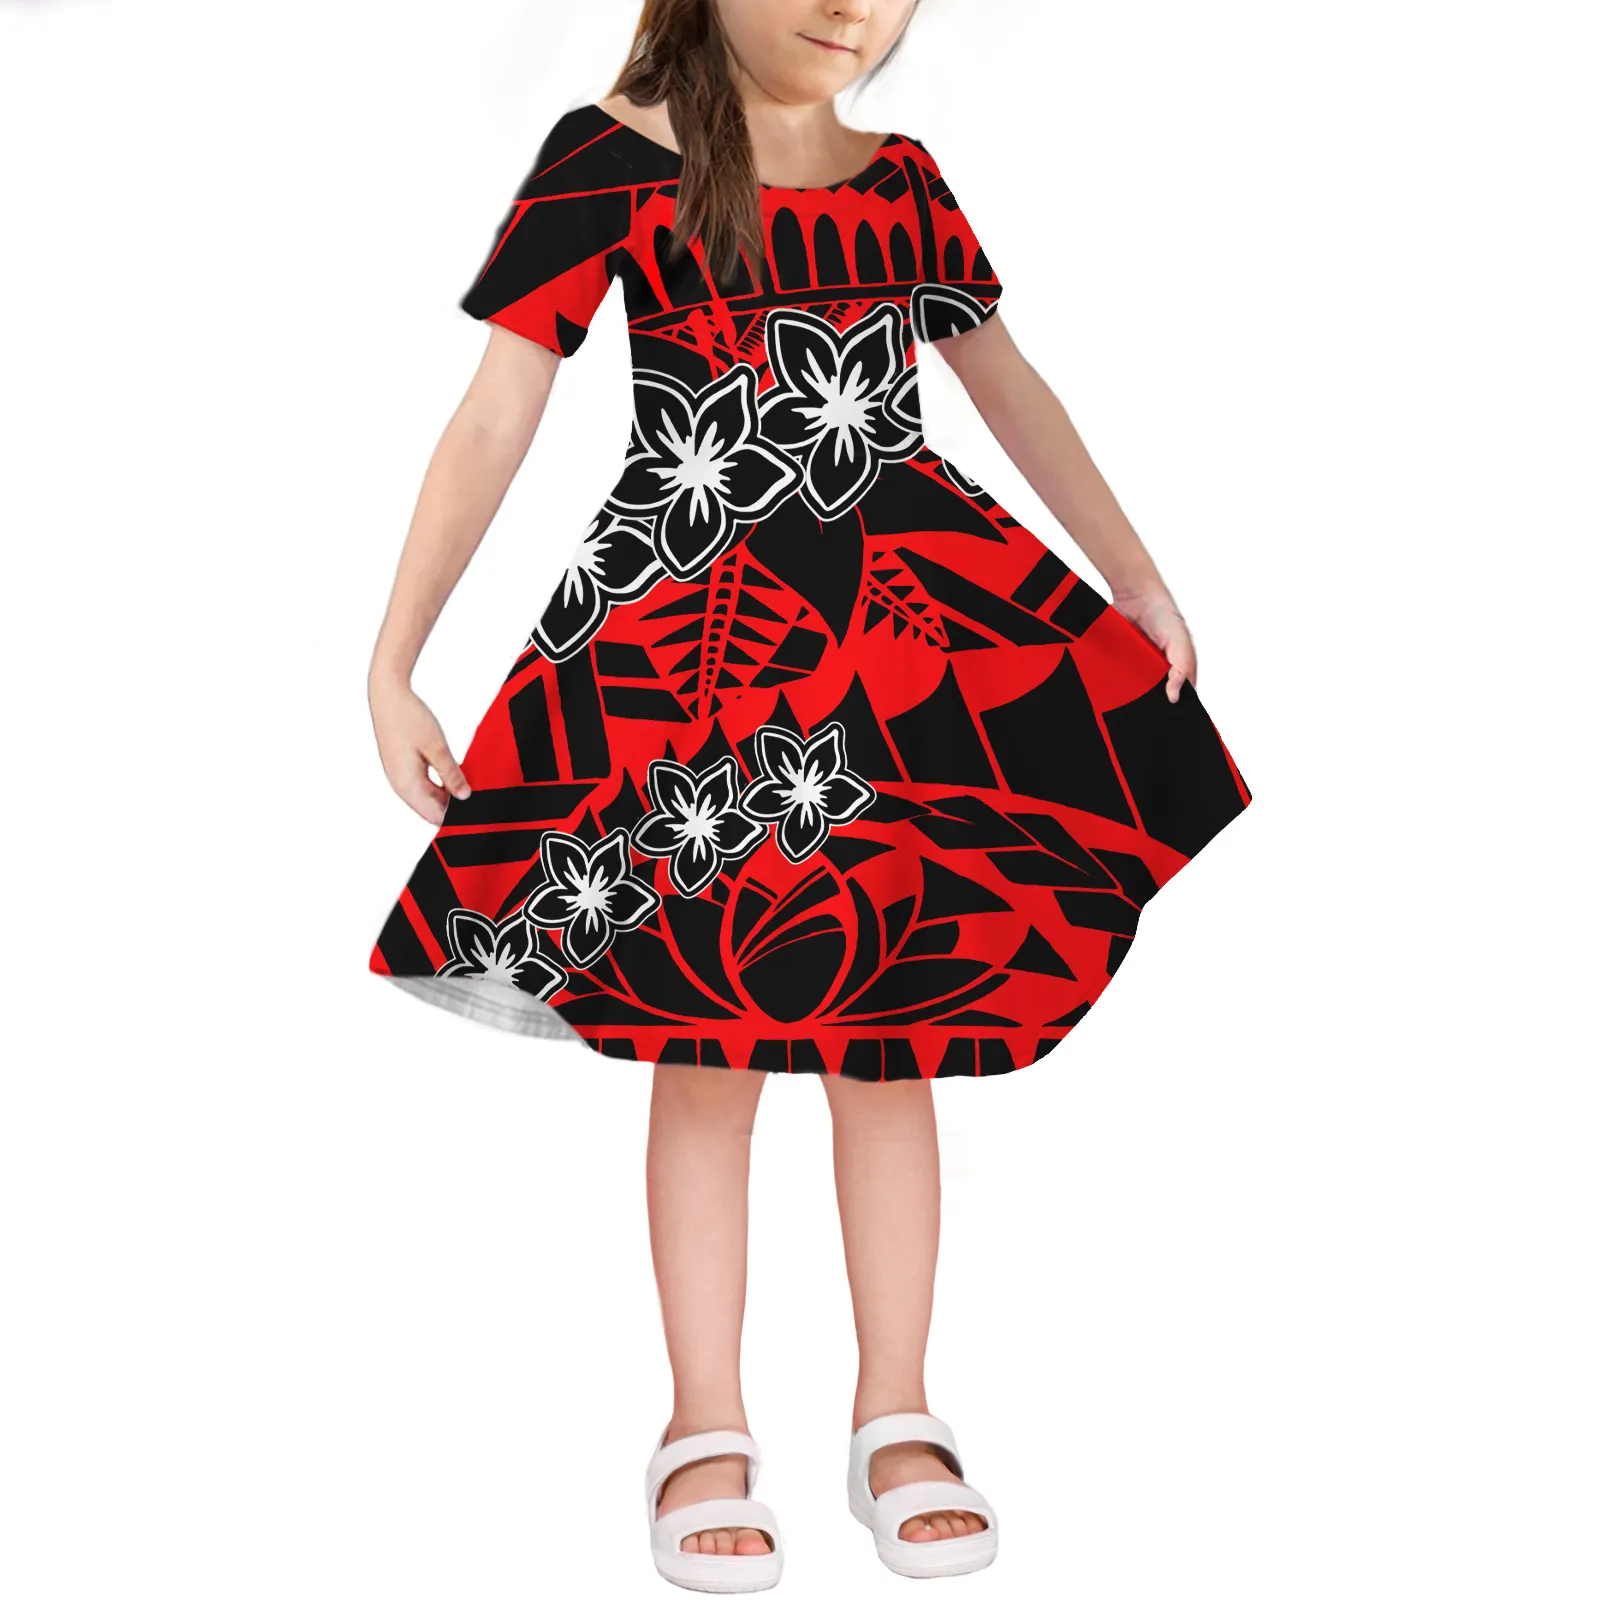 High quality New Polynesian Tribal Samoan Pattern Printed Baby Girls Kids Clothes Short Sleeve Girls' Dresses Factory Price